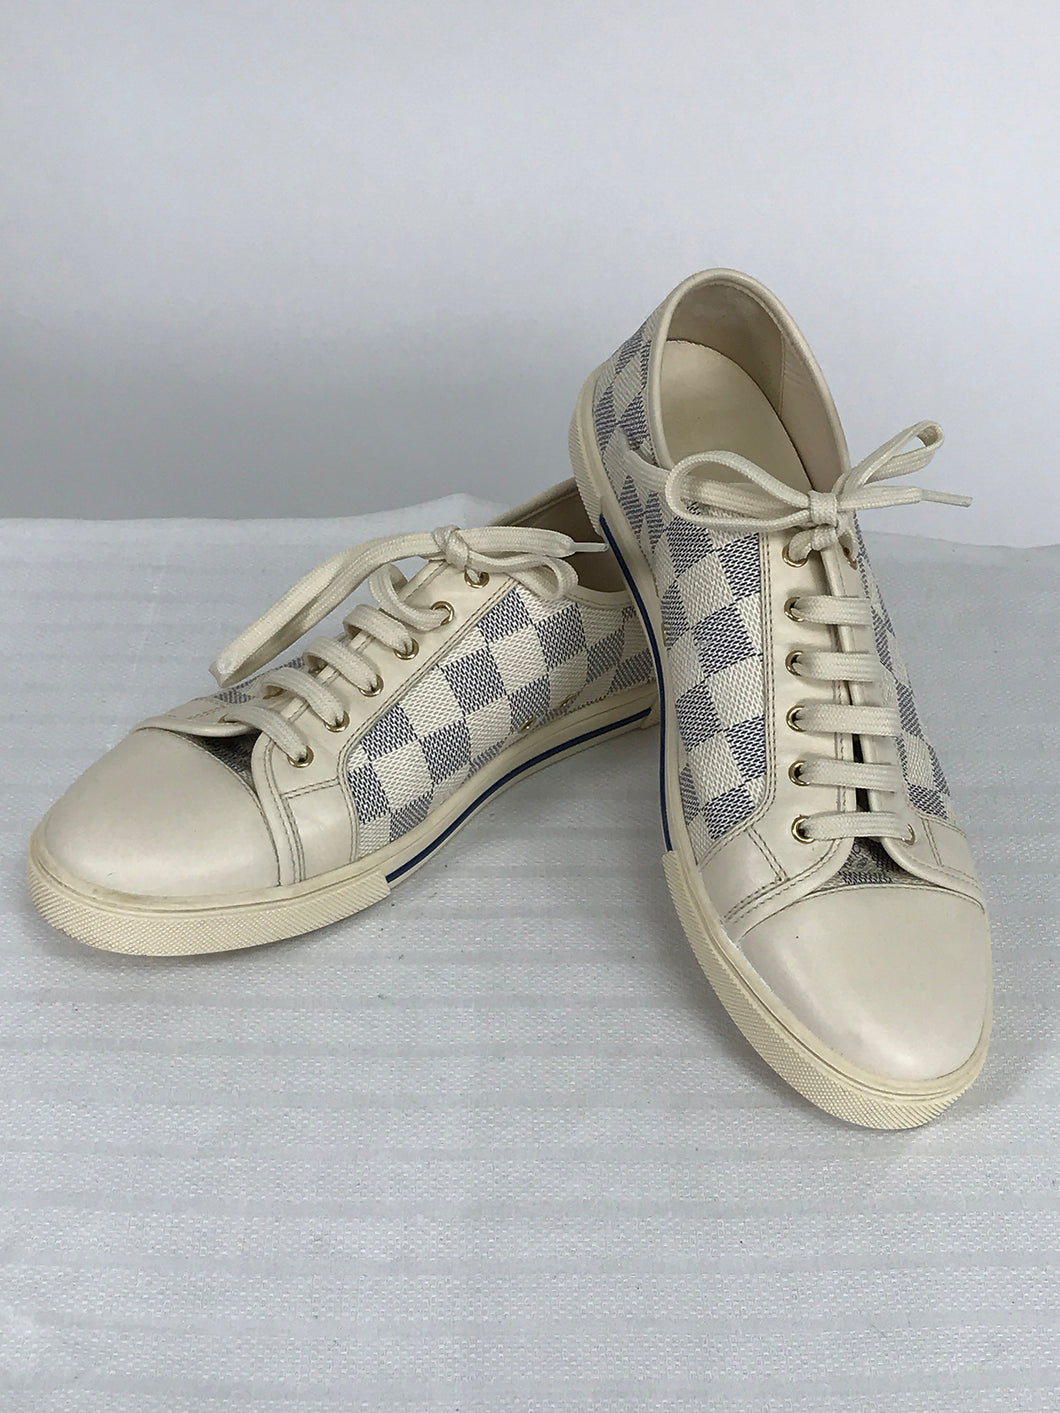 SOLD Louis Vuitton Damier Azur Womens Cream Leather Sneakers Gold